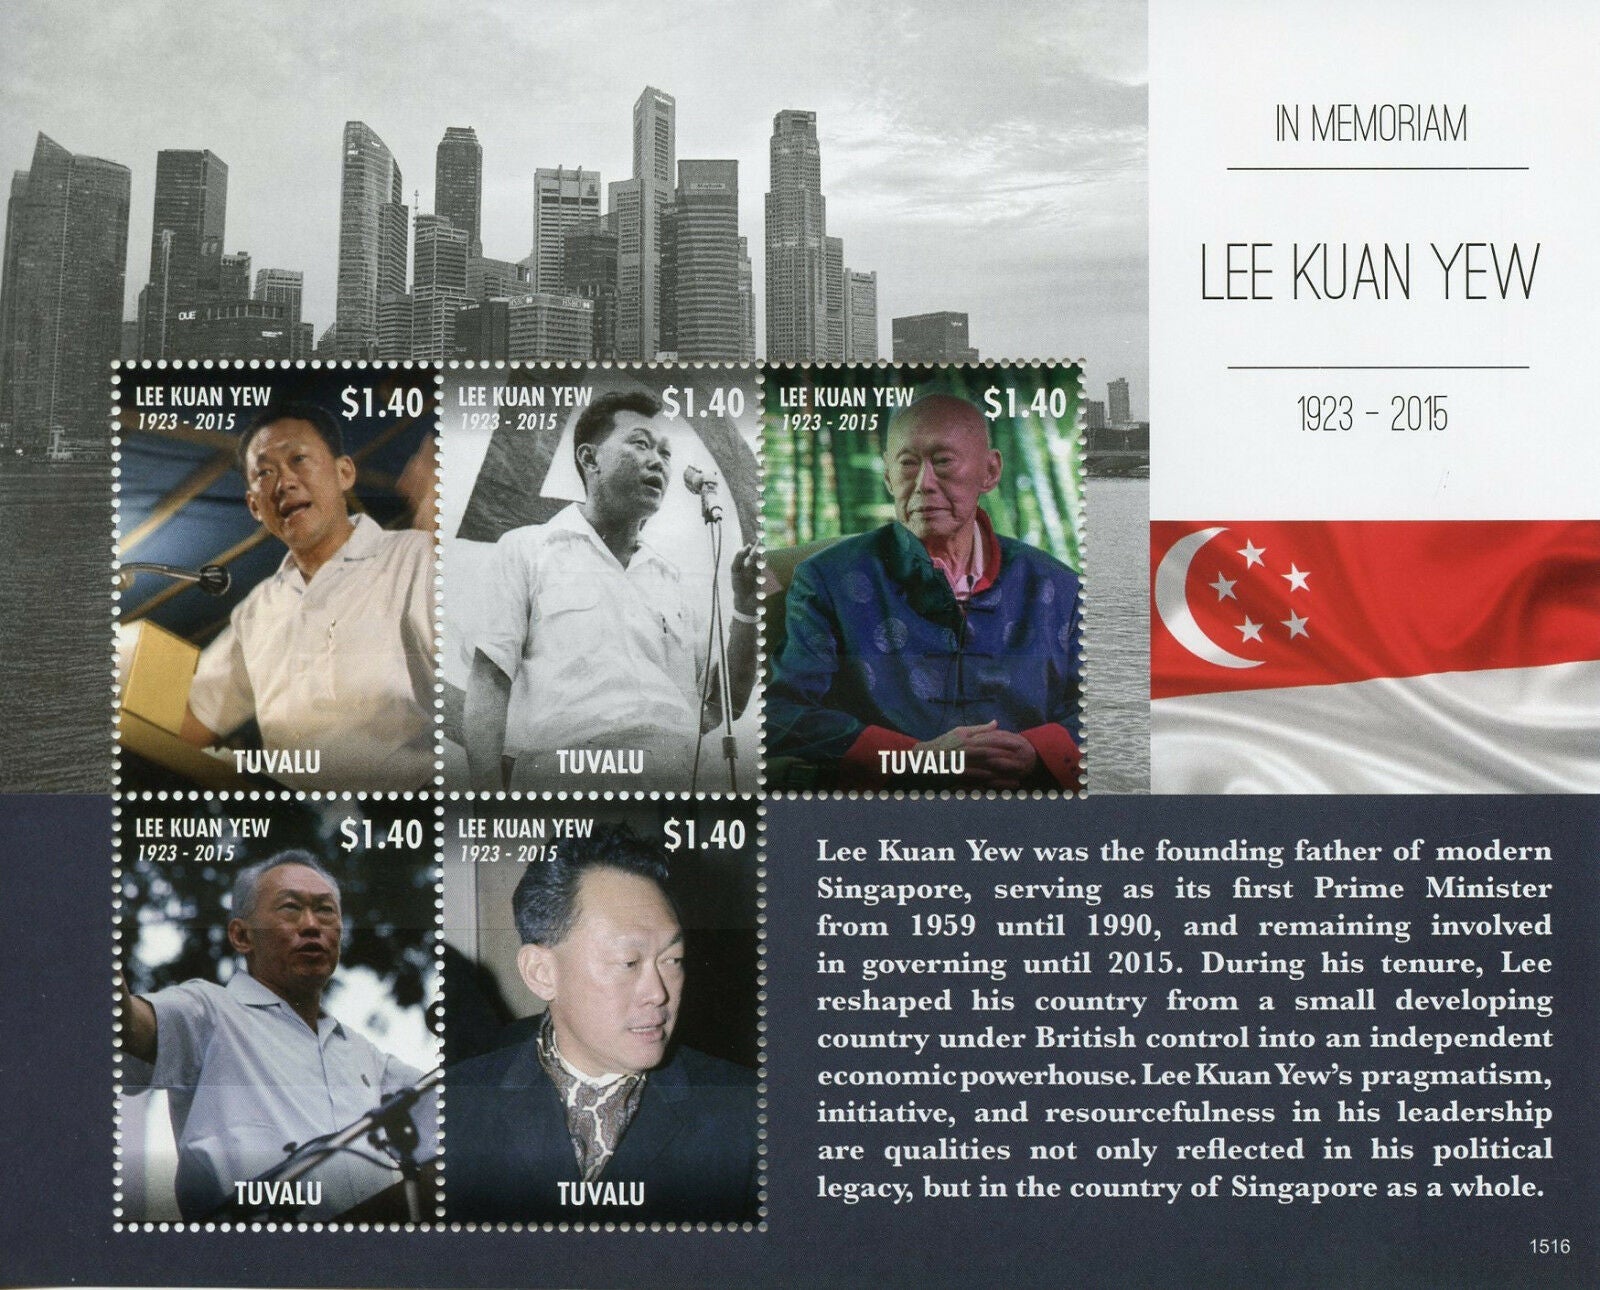 Tuvalu 2015 MNH Politicians Stamps Lee Kuan Yew in Memoriam Prime Minister Singapore 5v M/S